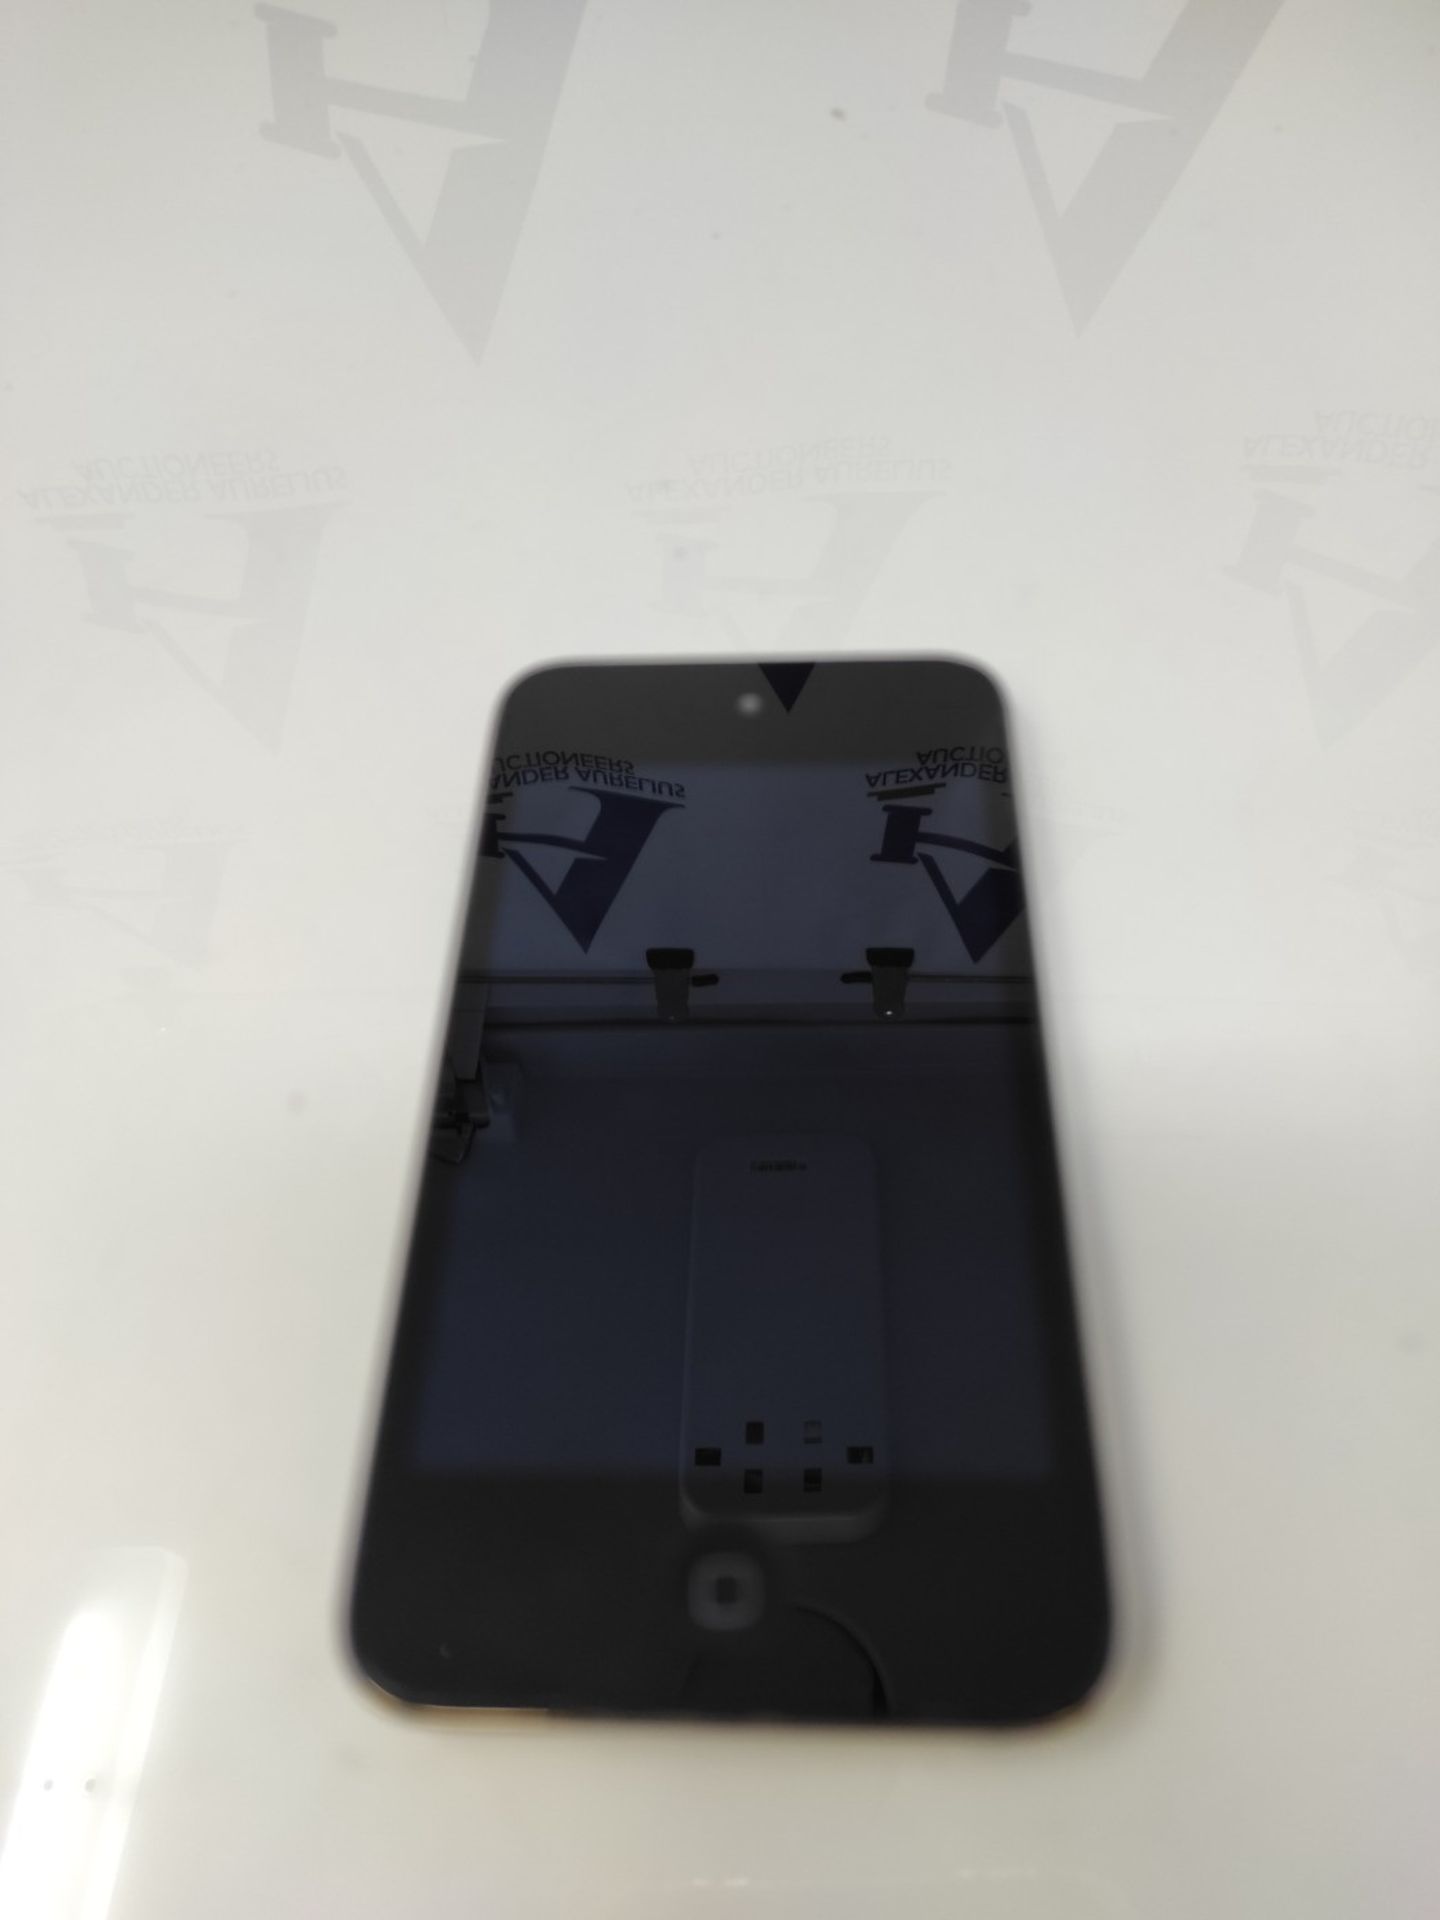 Apple iPod touch 8 GB 4th gen black - Image 2 of 2